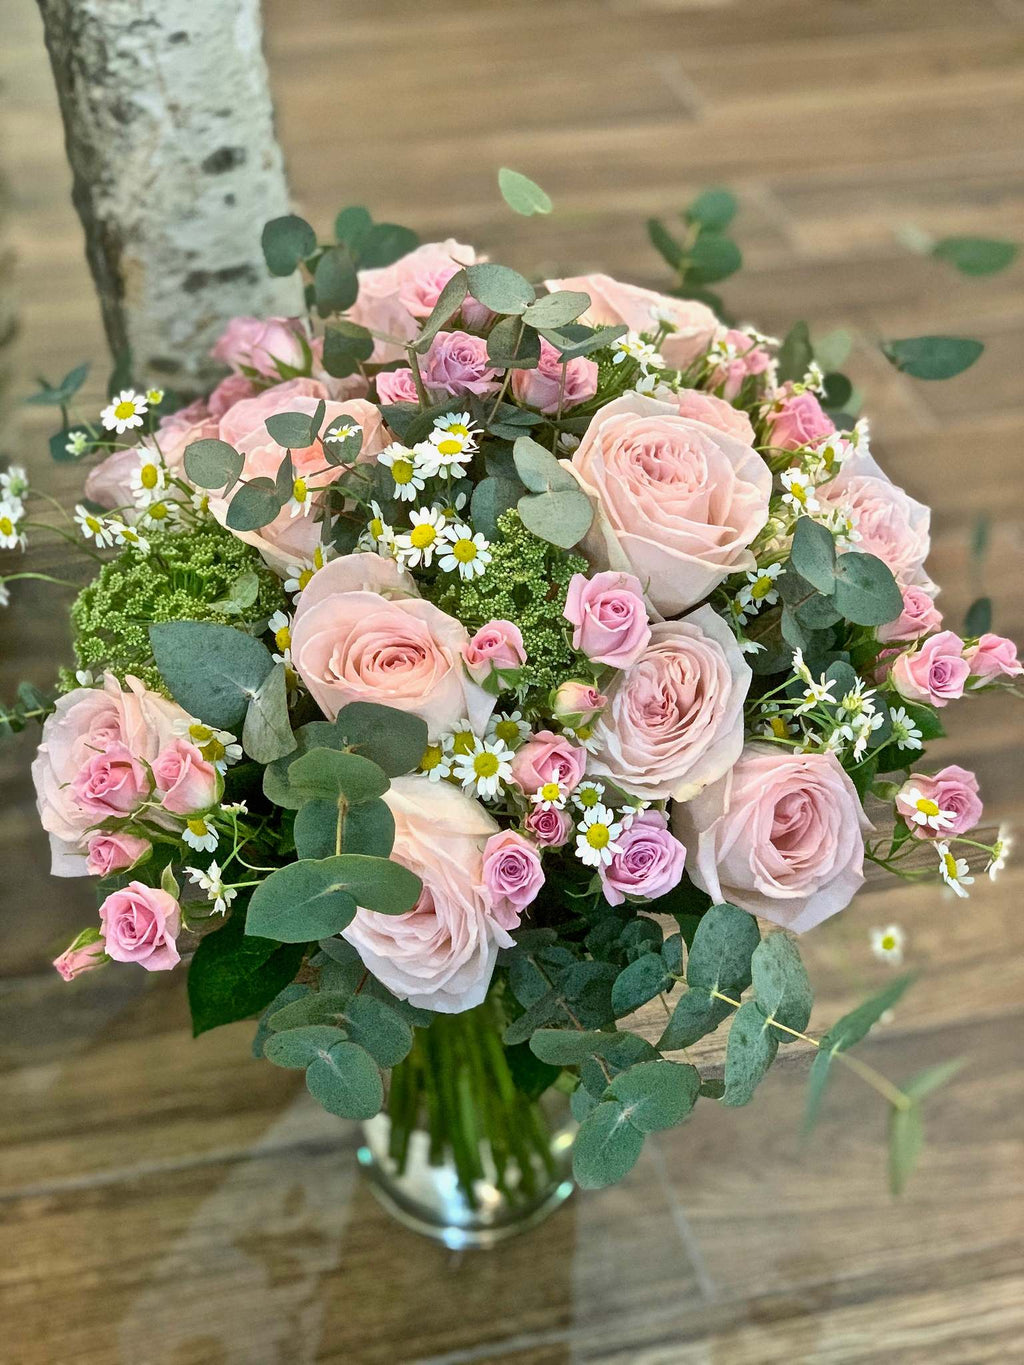 Louise bouquet by Margot Floral Design. A fresh flower bouquet composed of Pink O'Hara Garden Roses, Pink Baby Roses, Mini Daisy, Ammi, and Eucalyptus. Medium size.